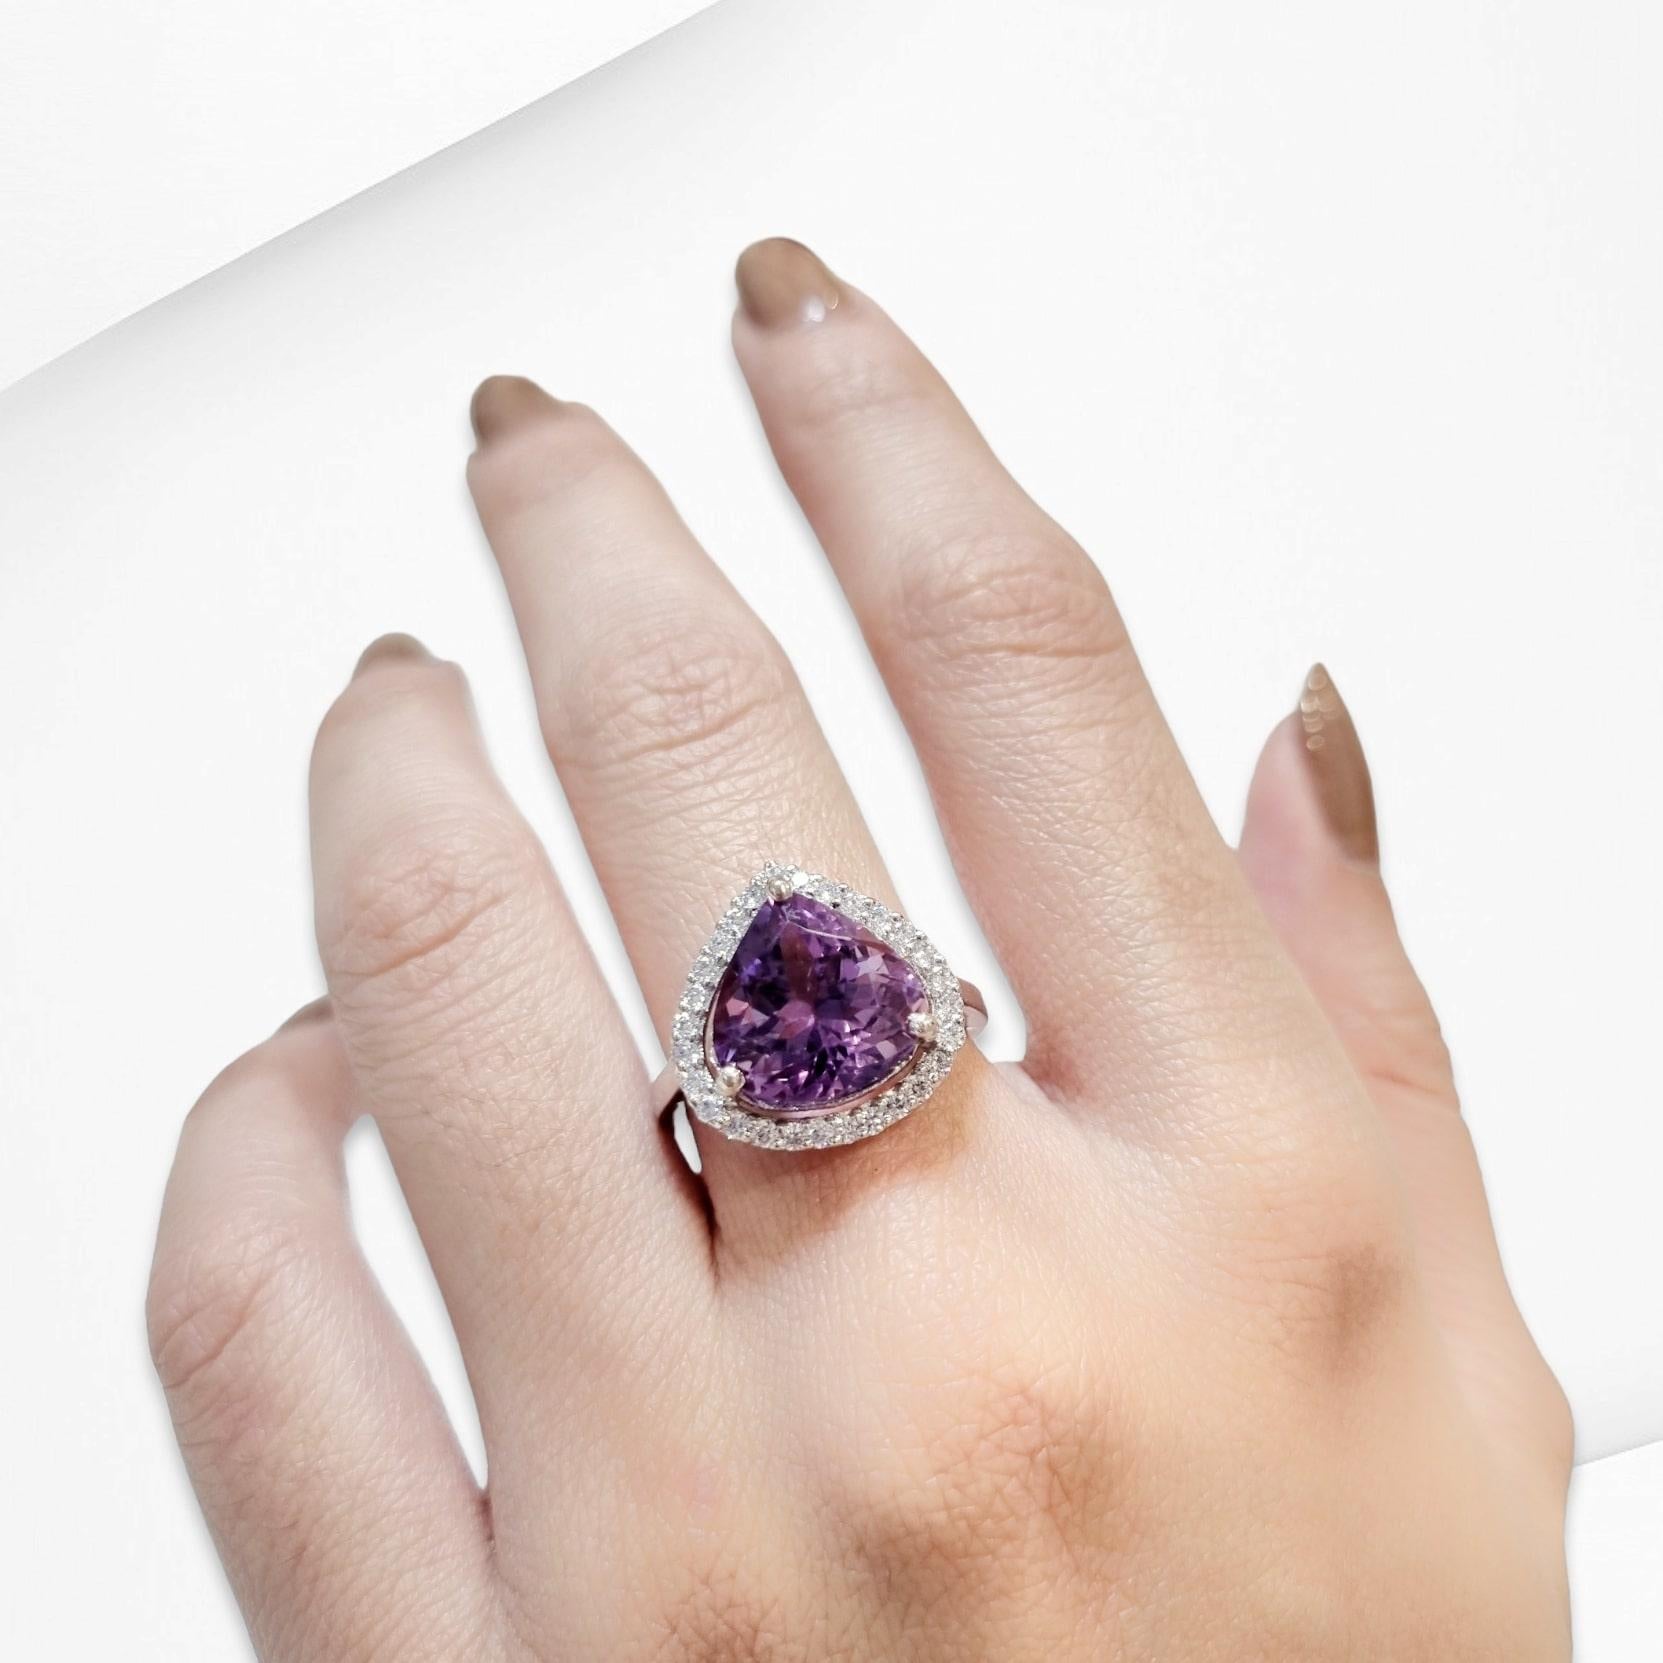 Timeless 5.35 Carat Pear Shaped Amethyst Ring In New Condition For Sale In Vadgam, GJ